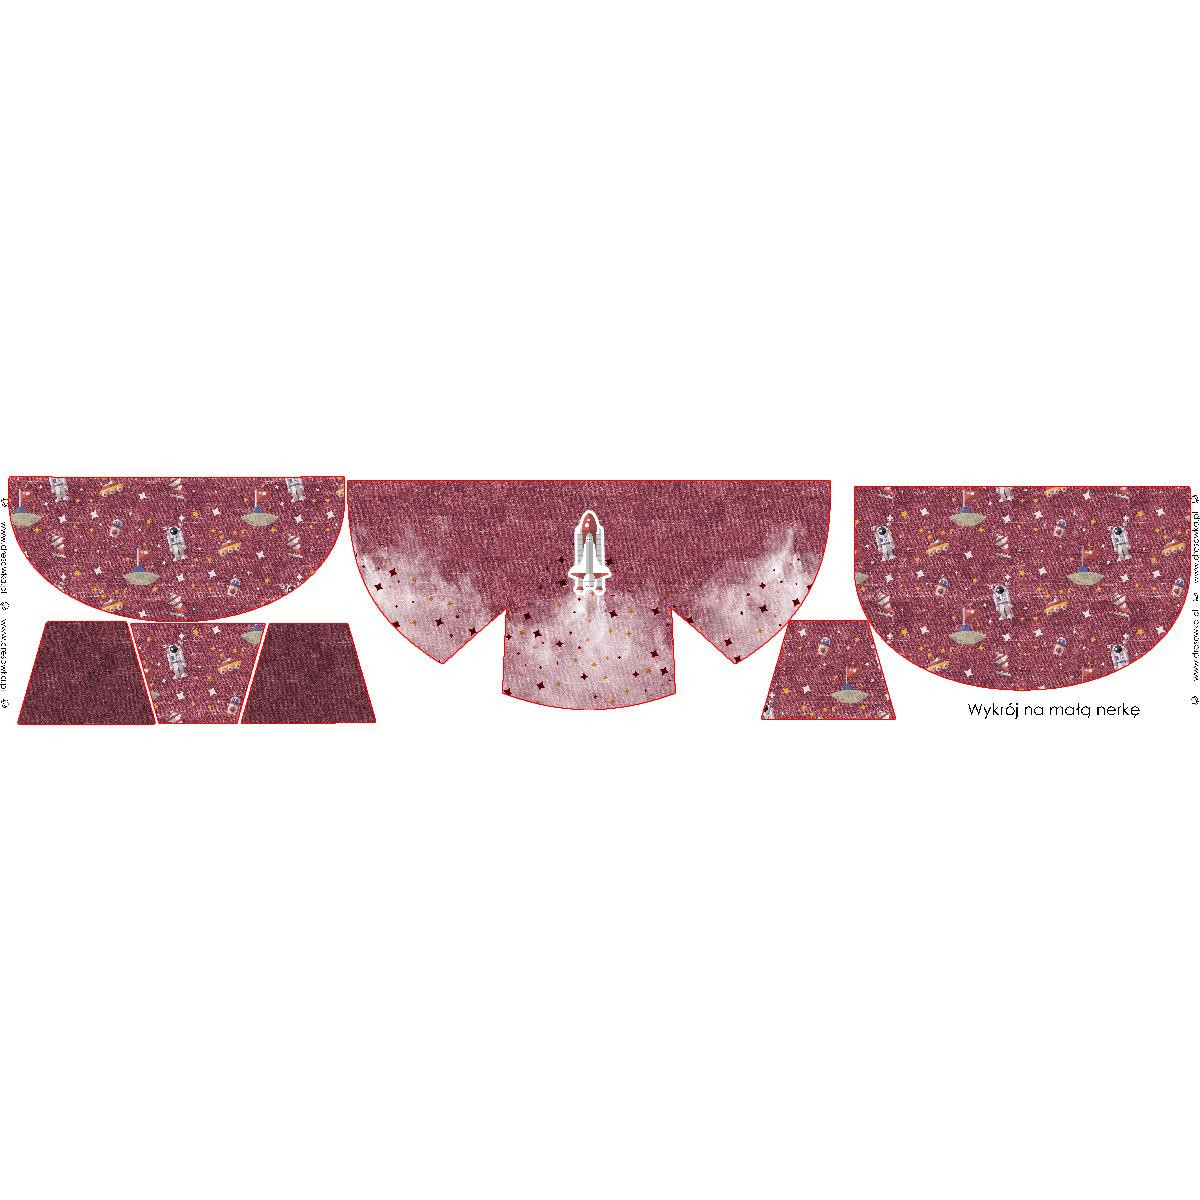 HIP BAG - SPACESHIP (SPACE EXPEDITION) / ACID WASH MAROON / Choice of sizes